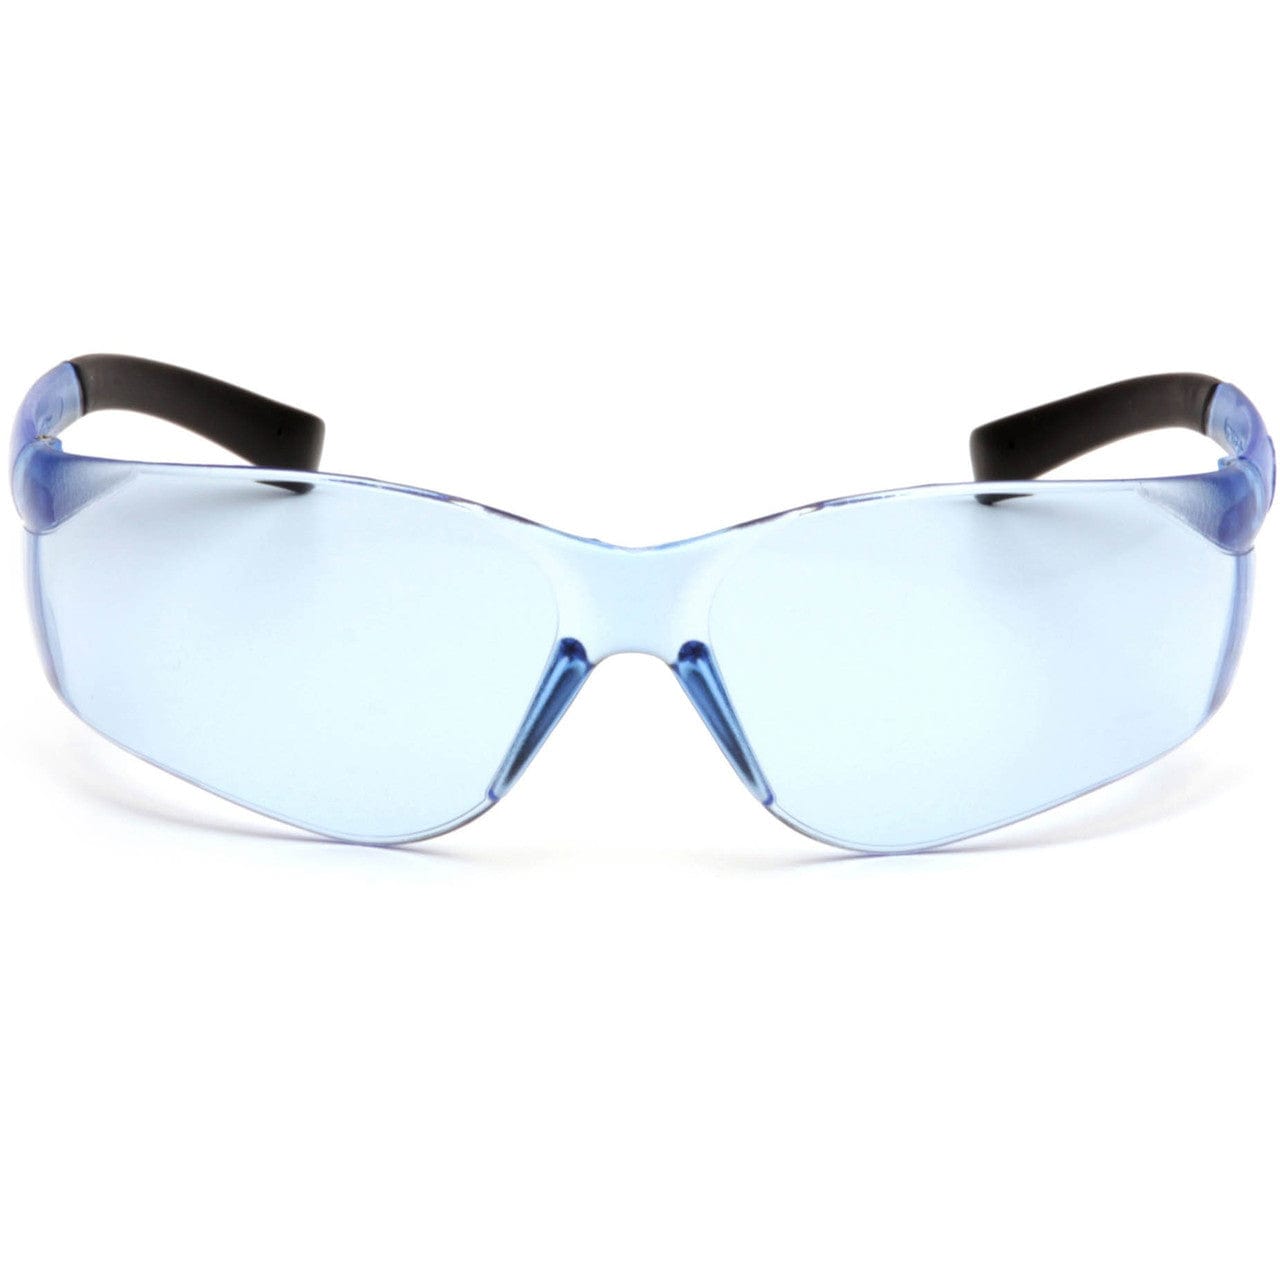 Pyramex Ztek Safety Glasses with Infinity Blue Anti-Fog Lens S2560ST Front View